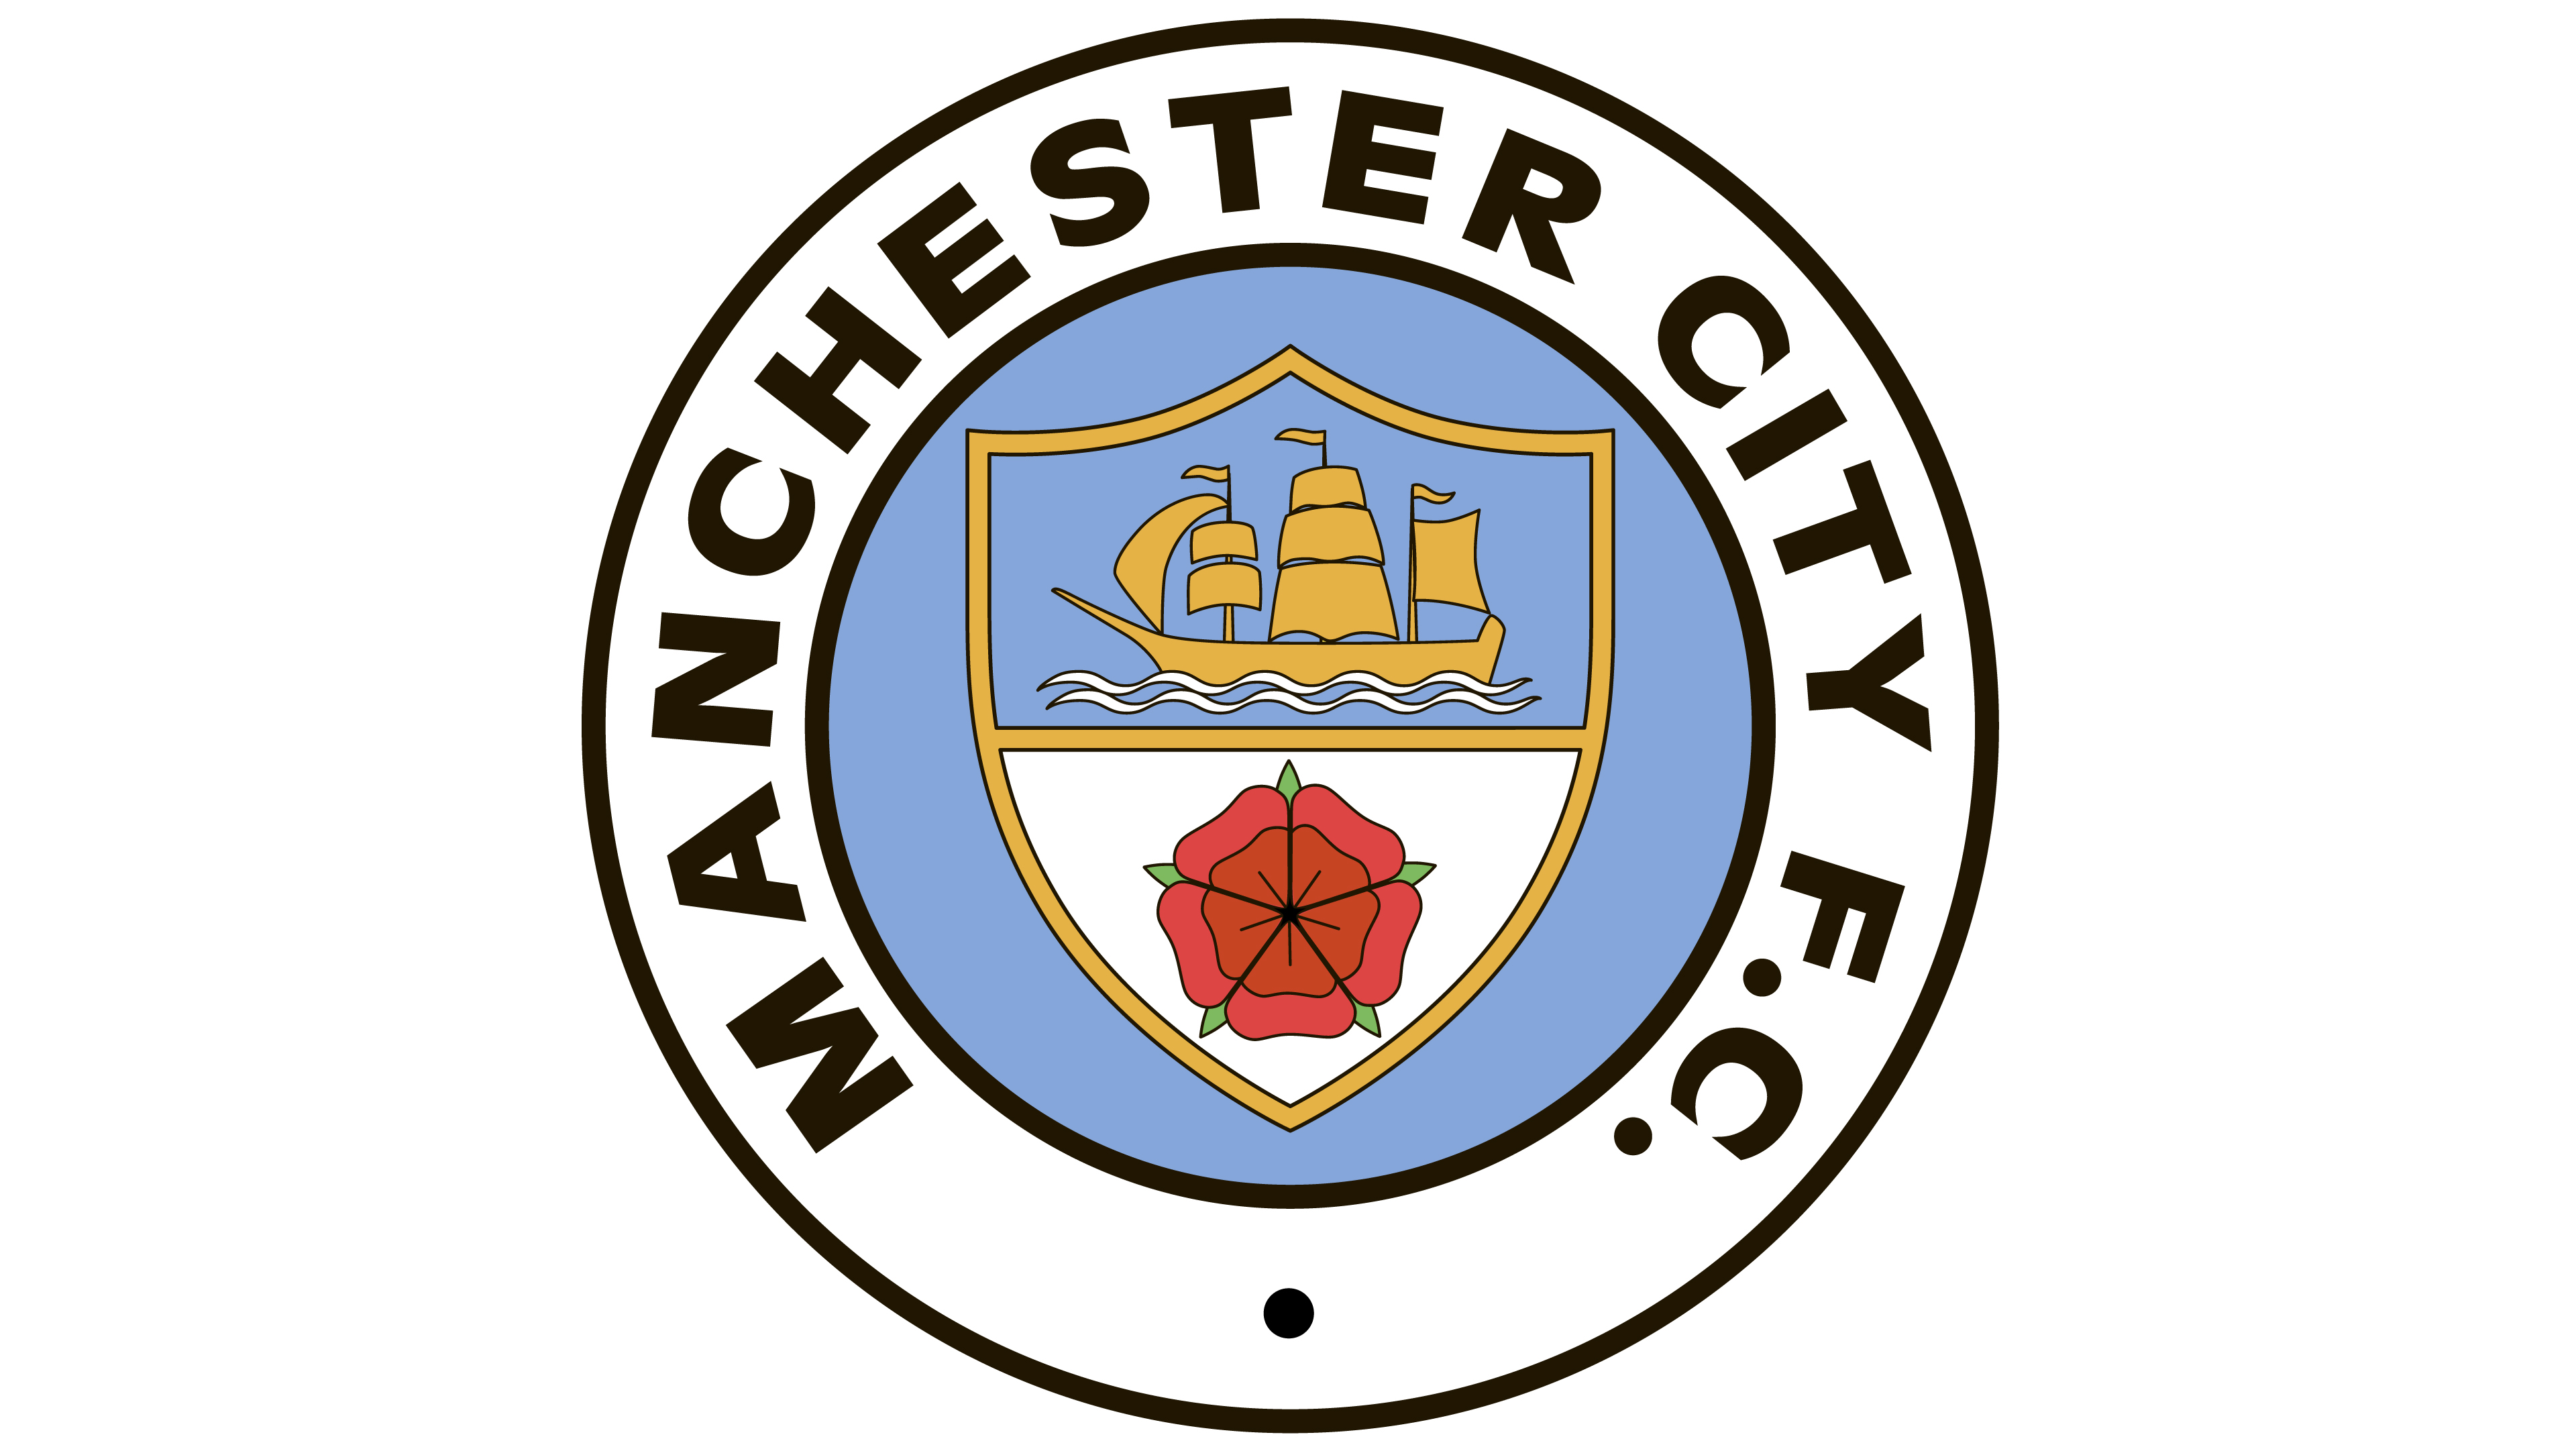 Manchester City logo 1972 1976 - Countdown to Man City Match as Clubs Agree to Donate Proceeds to Charity